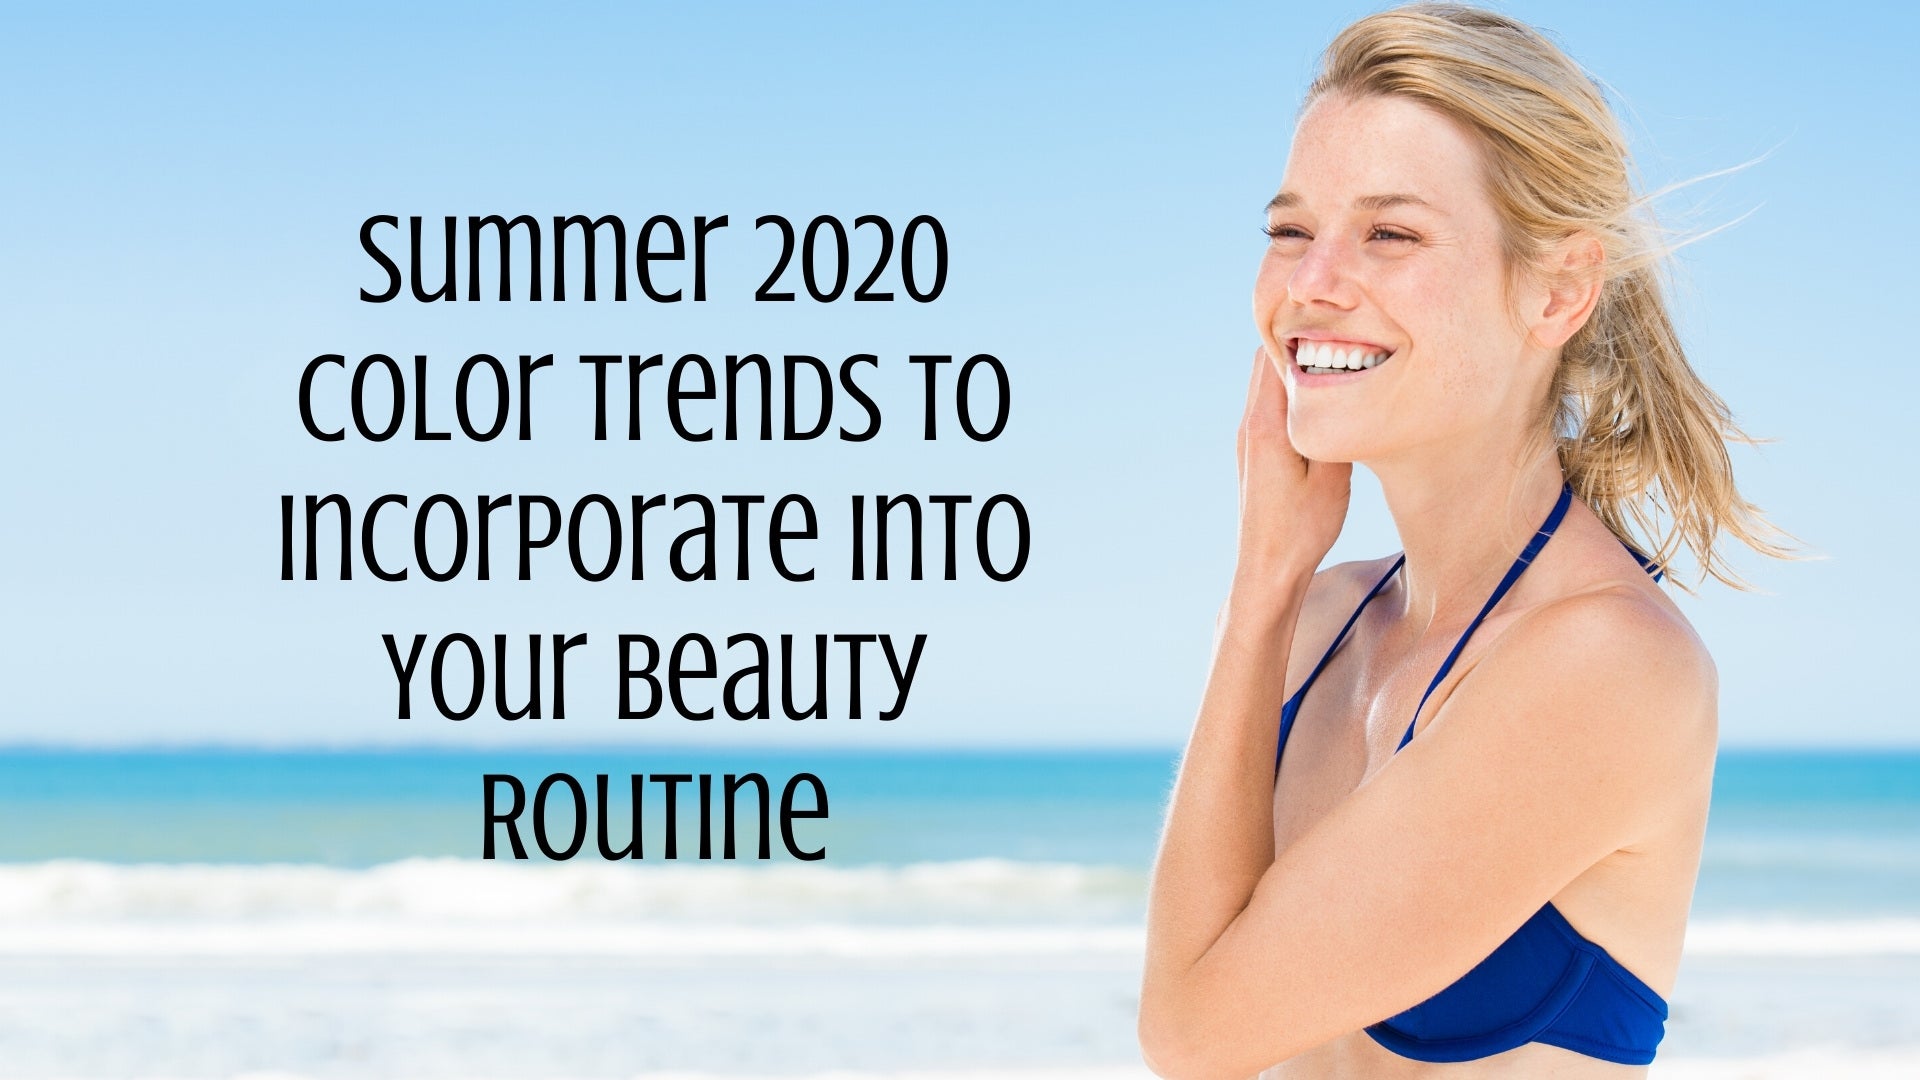 Summer 2020 Color Trends to Incorporate Into Your Beauty Routine